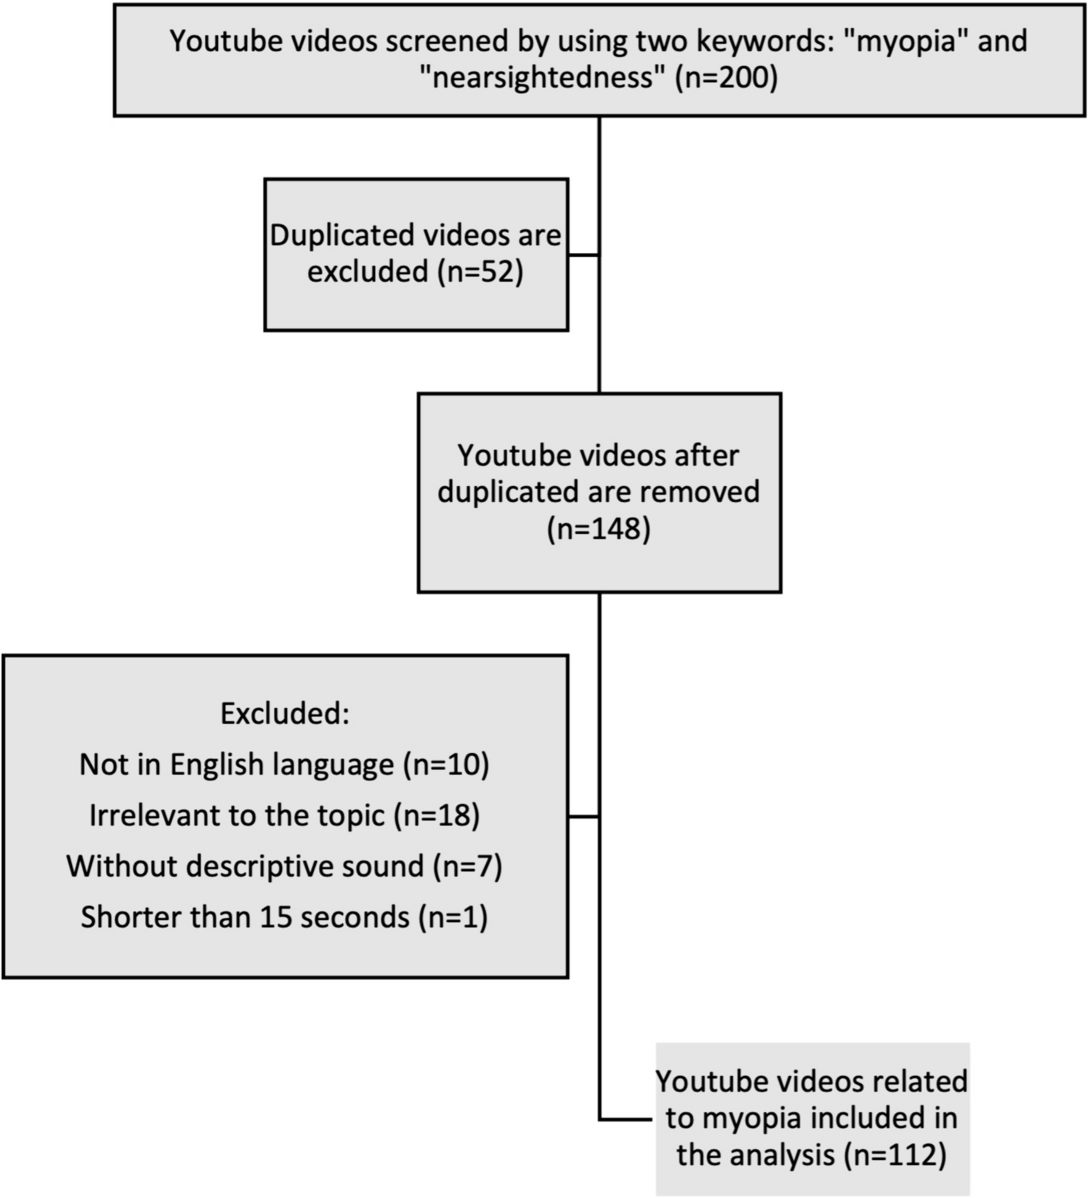 Evaluating the quality and reliability of YouTube videos on myopia: a video content analysis